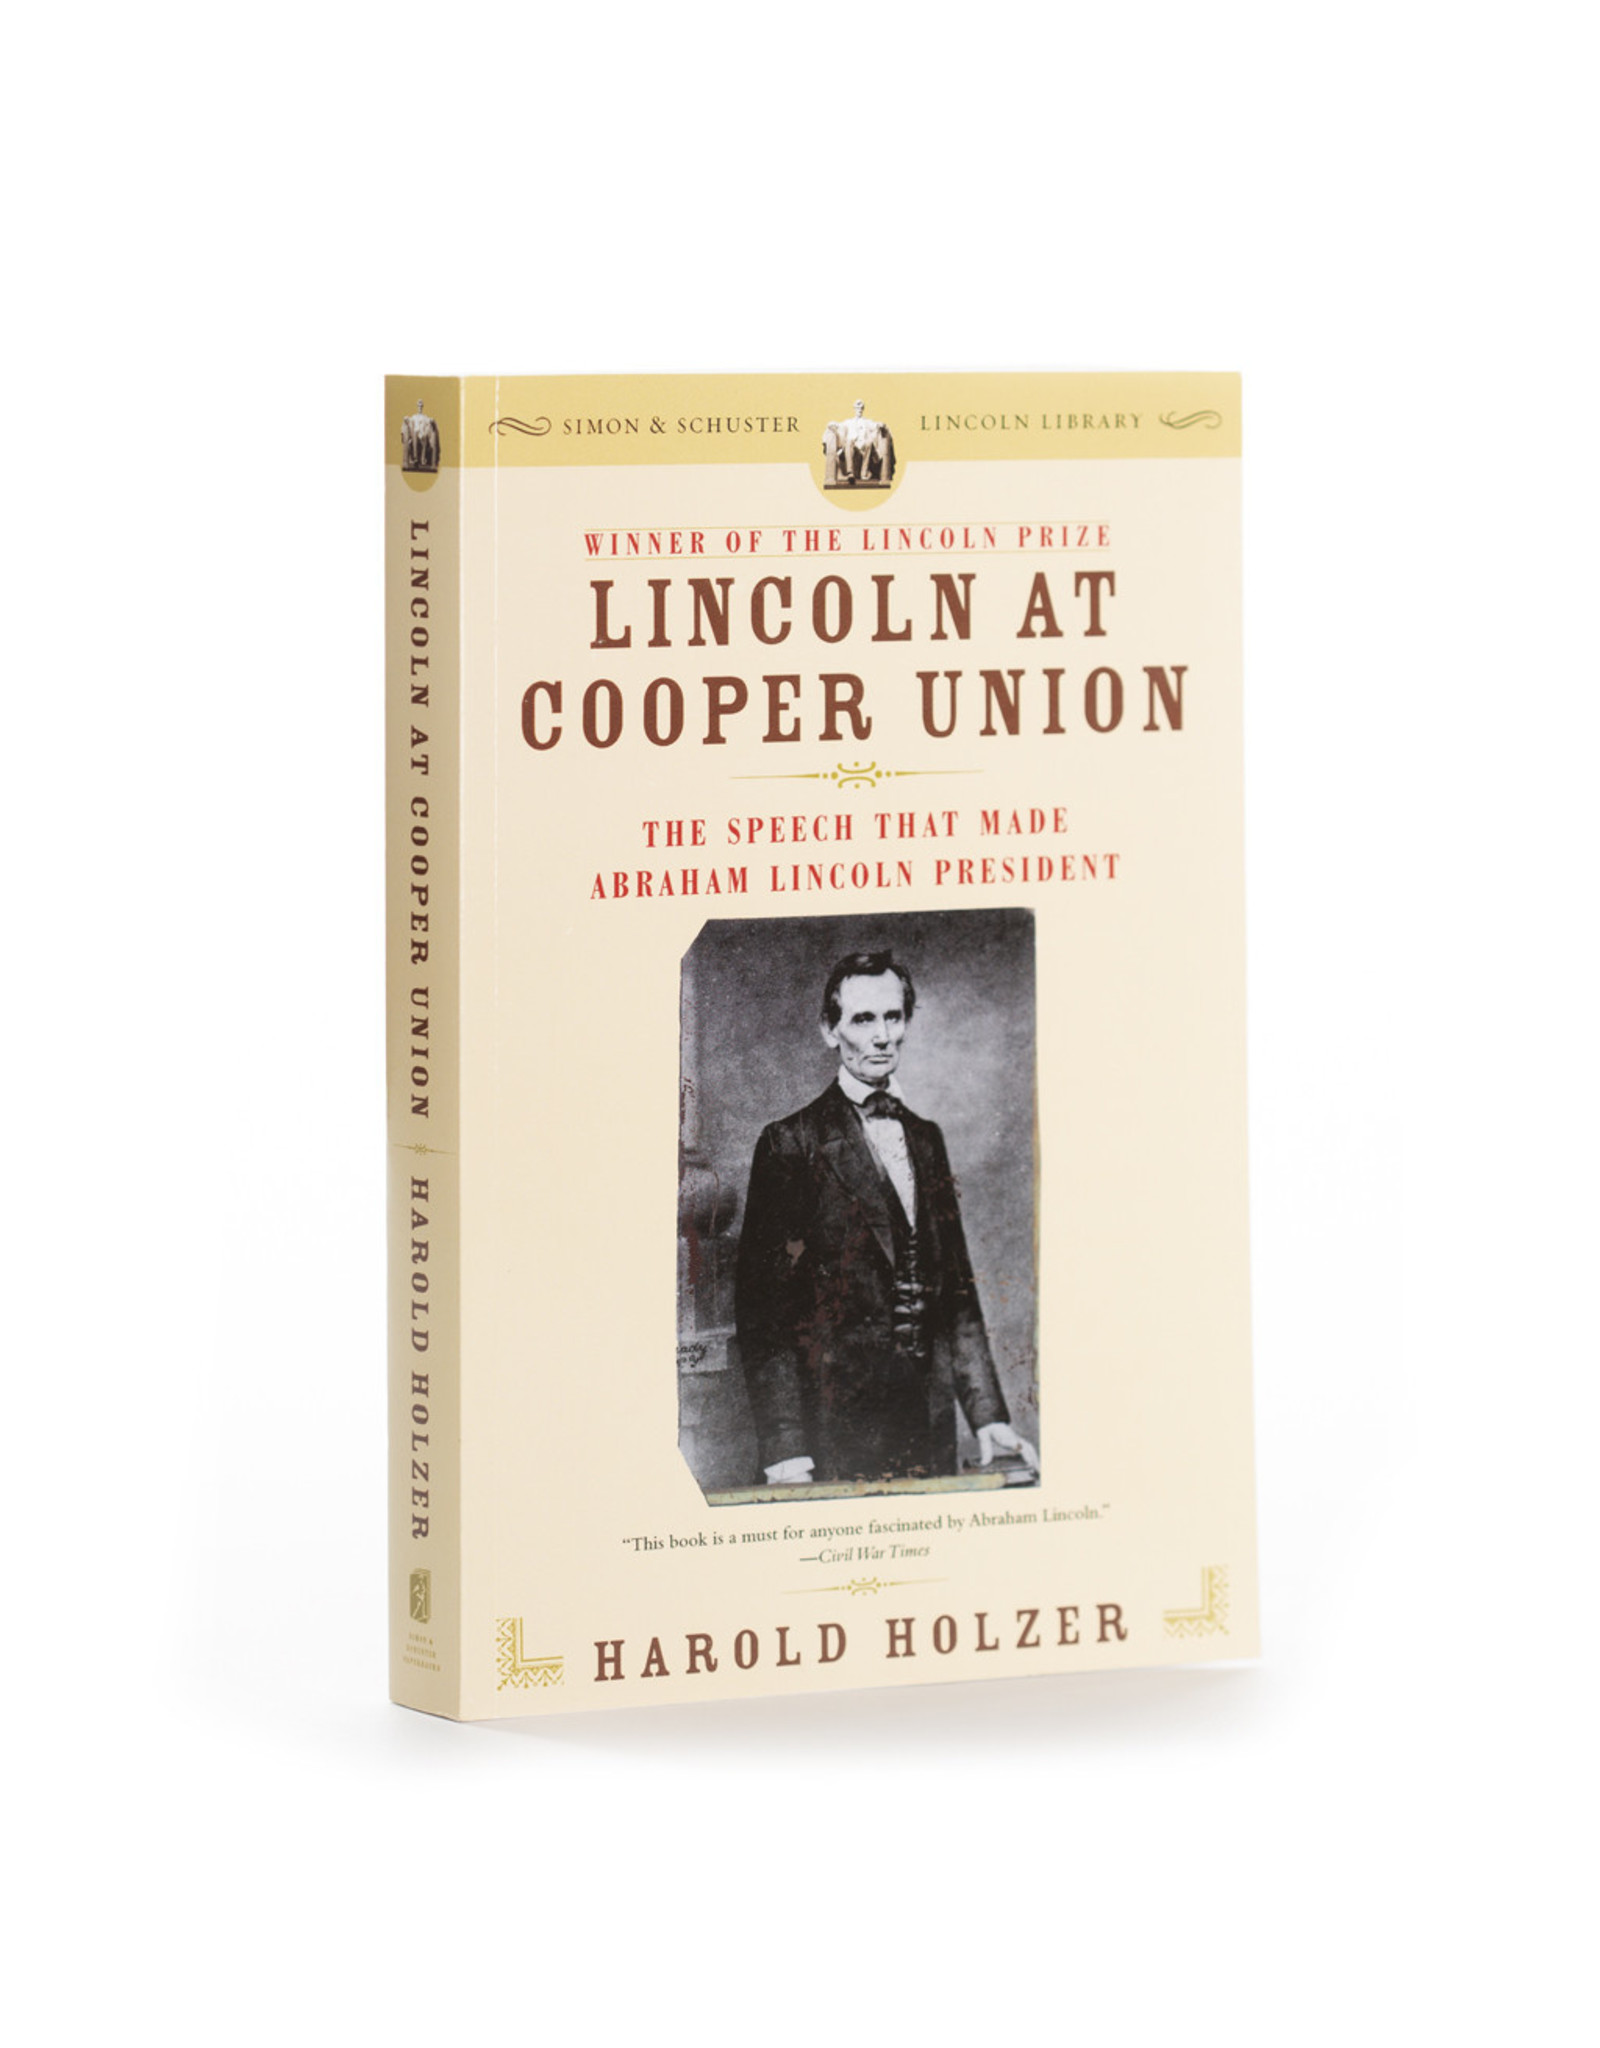 Lincoln at Cooper Union, Harold Holzer